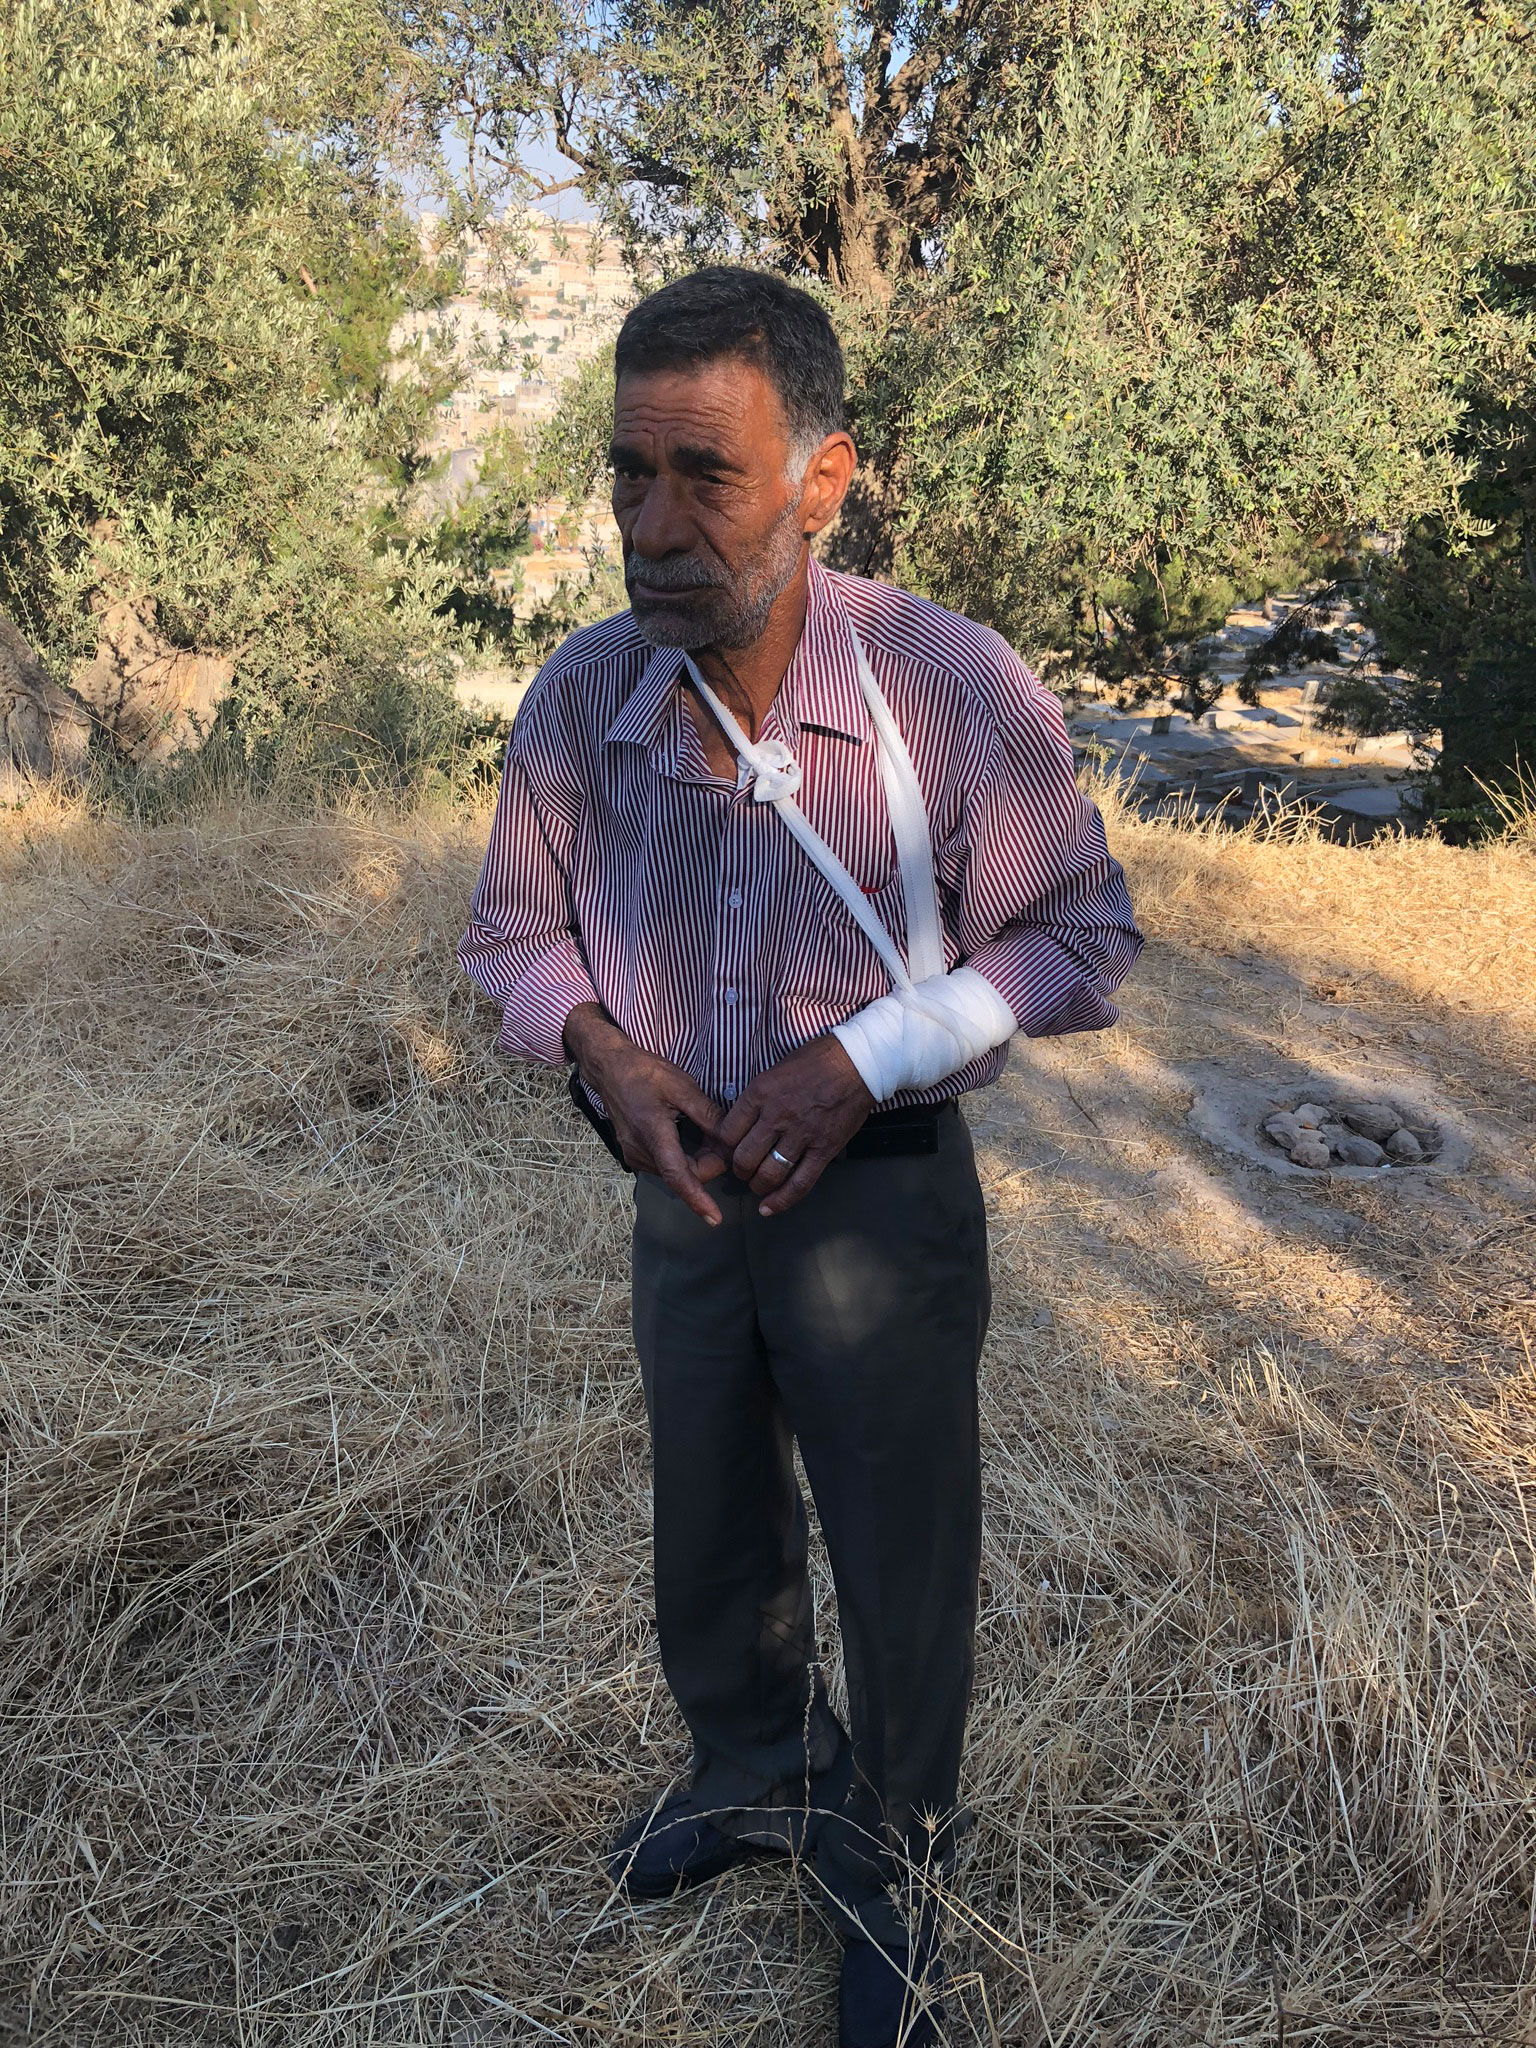 Idrees Zahdeh stands in his field where he was attacked.